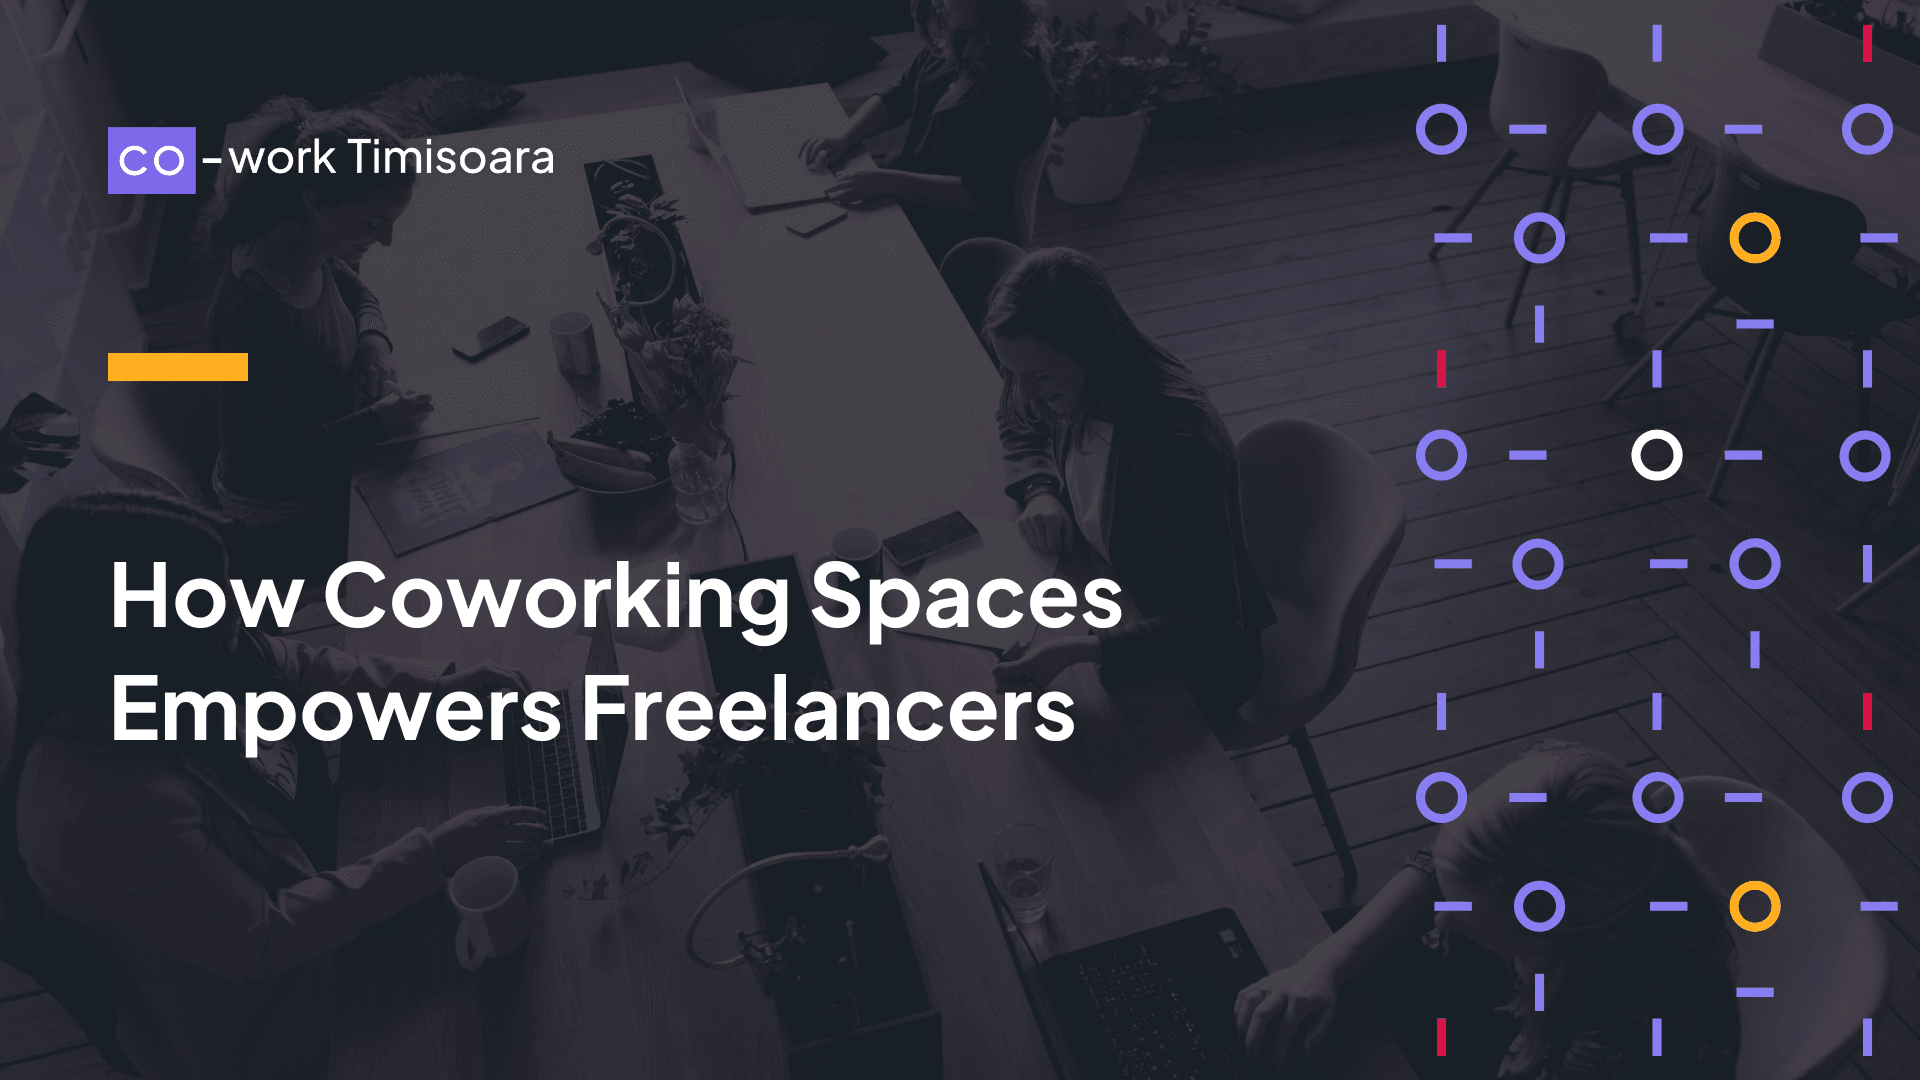  How Coworking Spaces Empower Freelancers